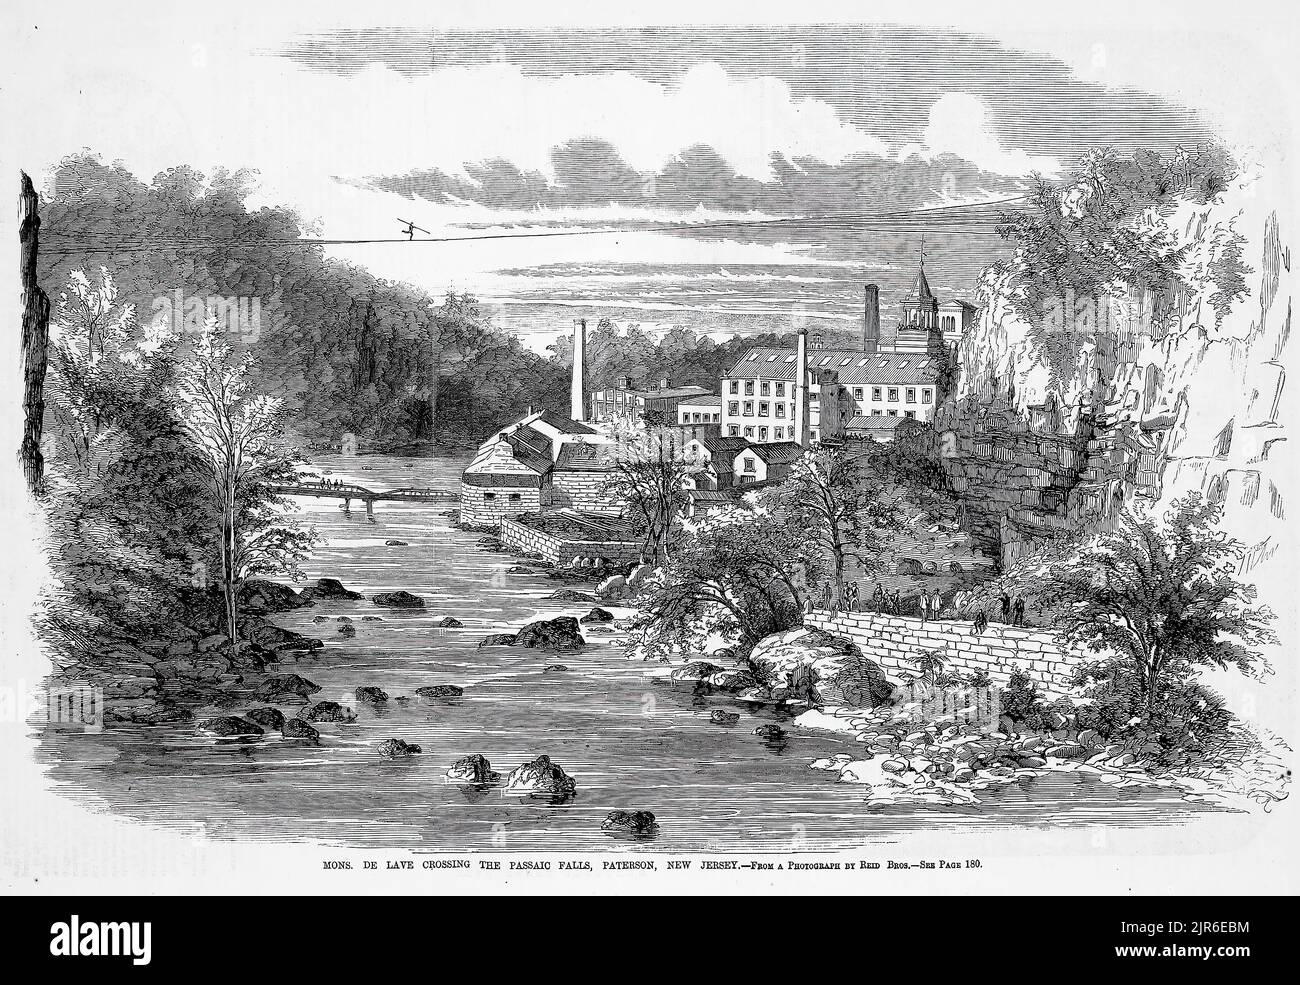 Mons. De Lave crossing the Passaic Falls, Paterson, New Jersey (1860). Great Falls of the Passaic River. 19th century illustration from Frank Leslie's Illustrated Newspaper Stock Photo